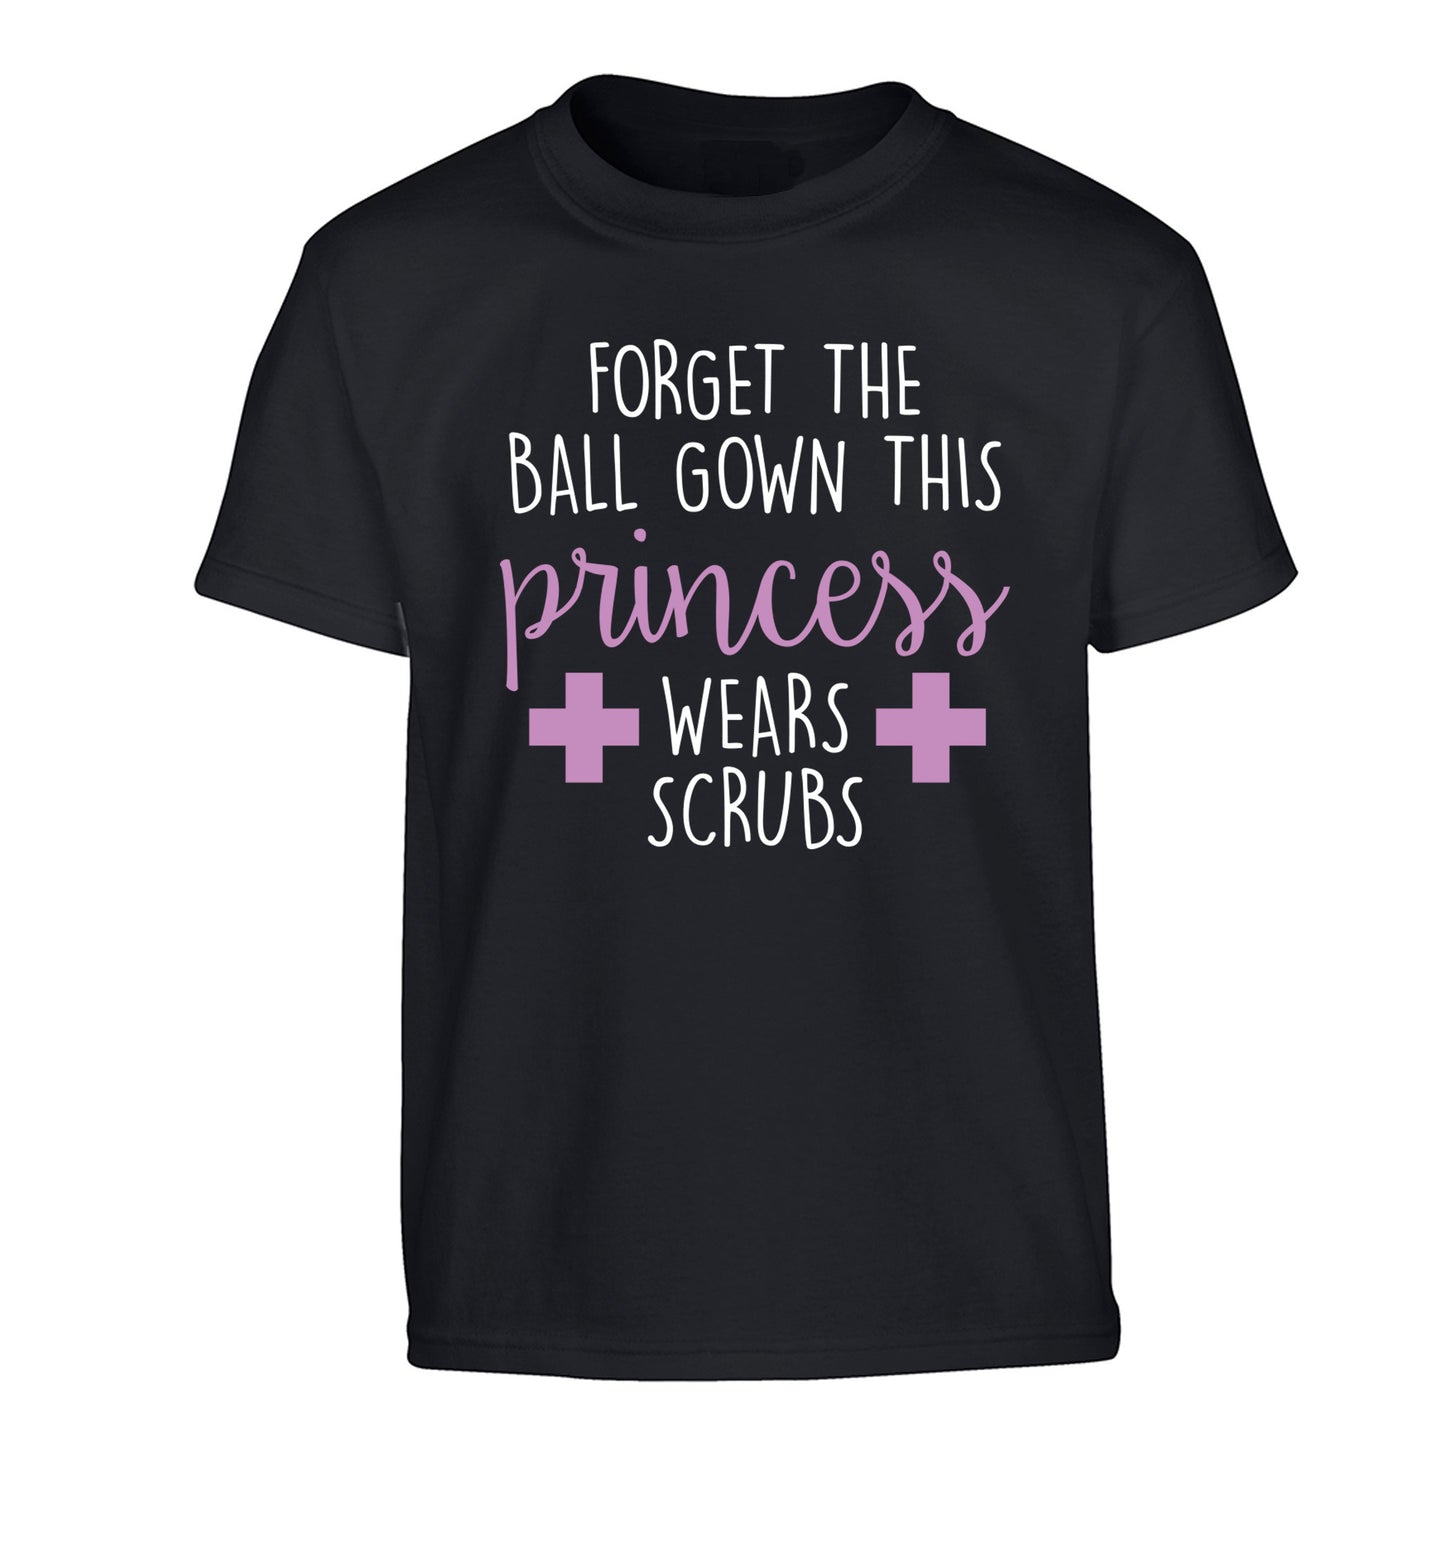 Forget the ball gown this princess wears scrubs Children's black Tshirt 12-14 Years